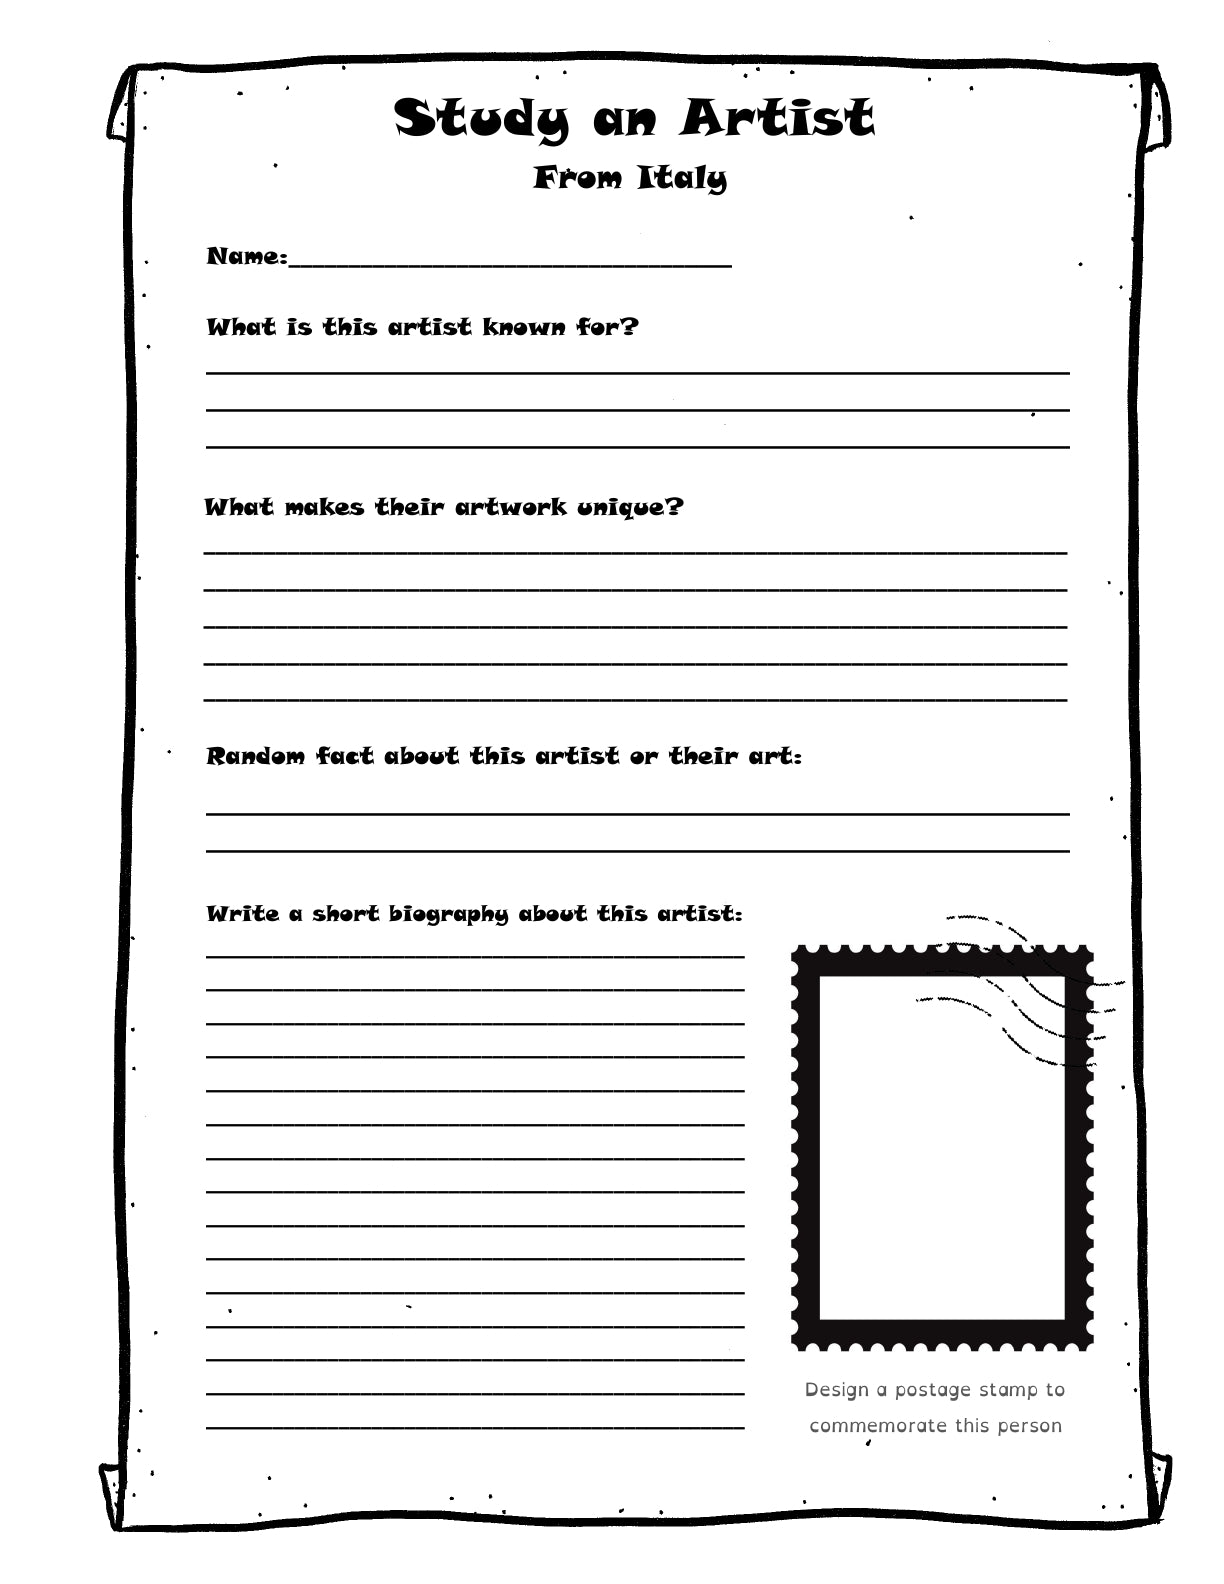 (Age 12+) The Artist's Fun-Schooling Journal